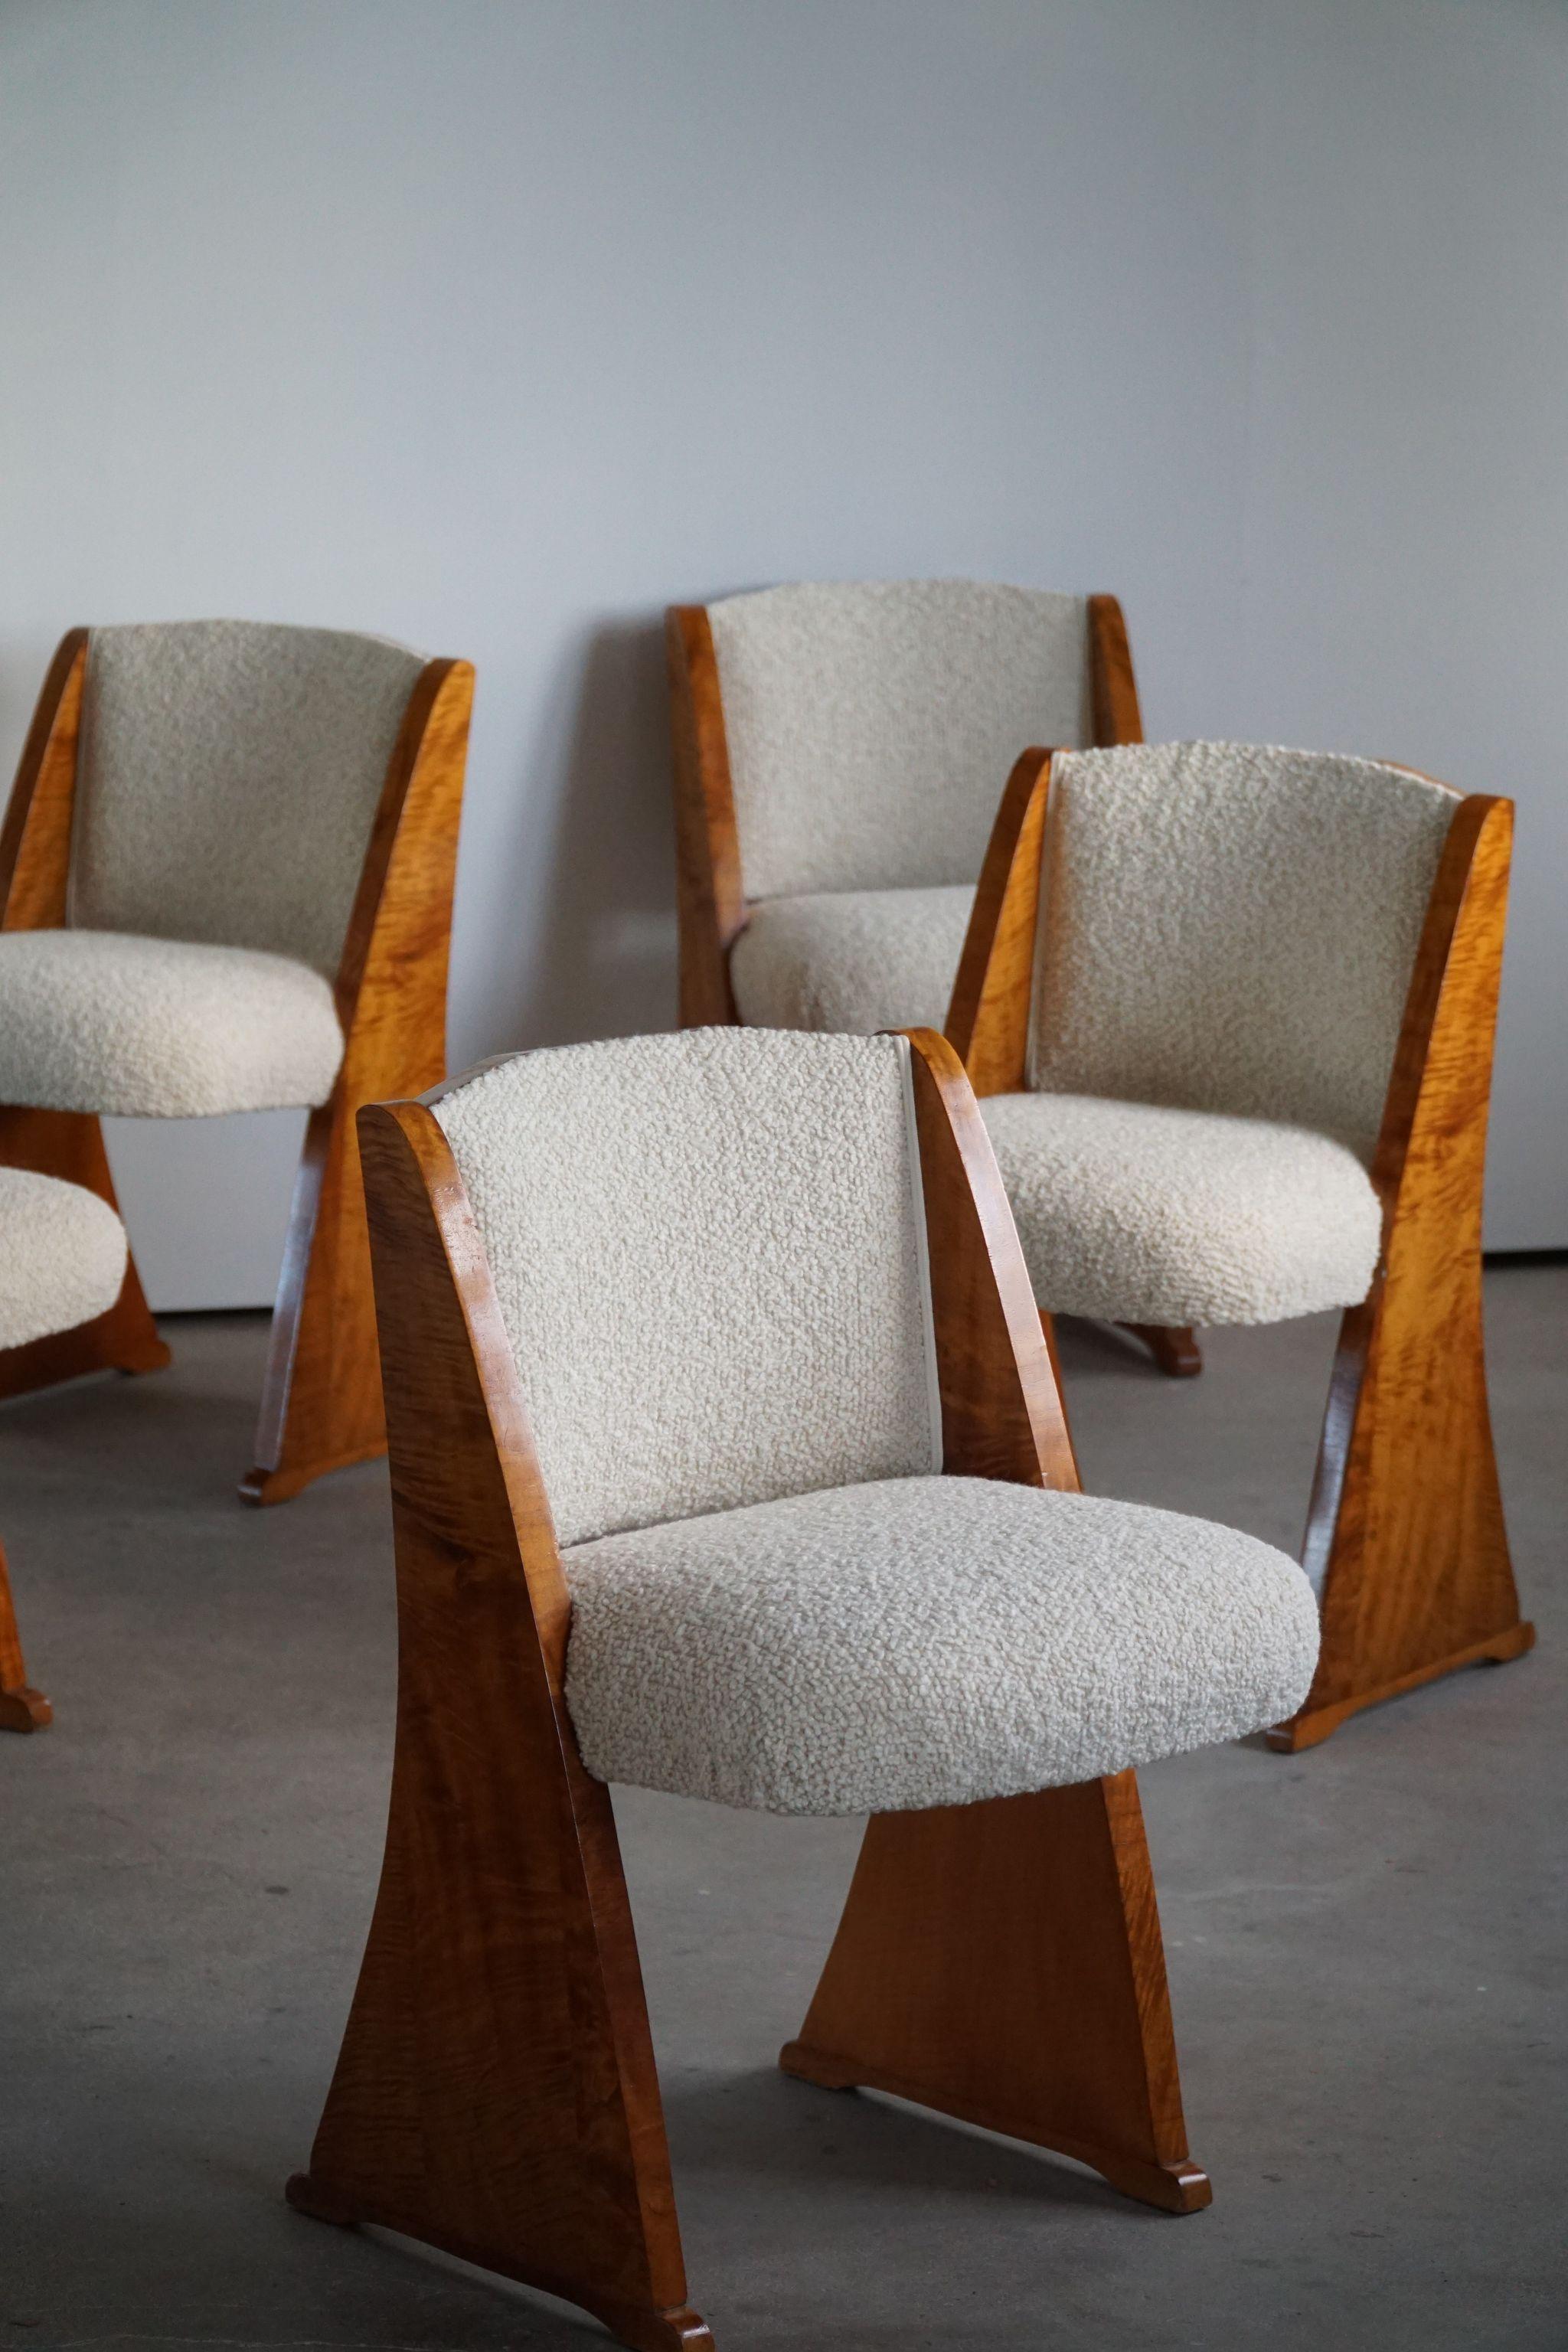 Art Deco, Set of 6 Dining Chairs in Birch & Bouclé, Danish Design, Made in 1930s 9